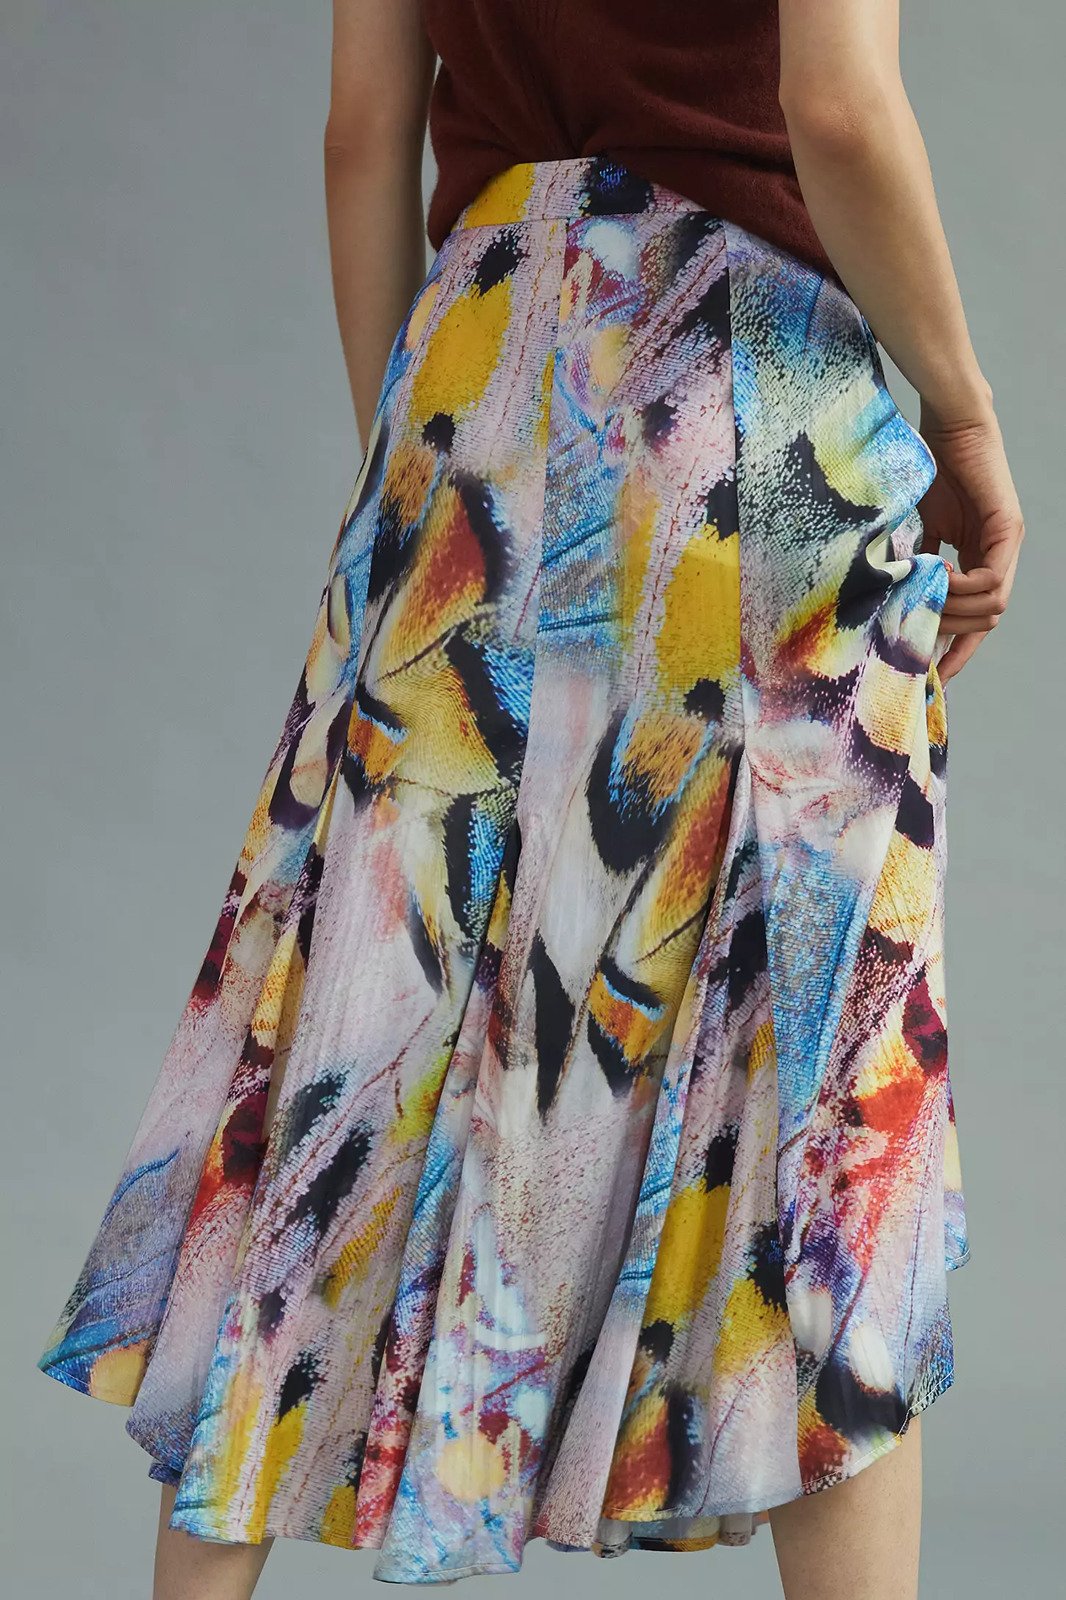 The Best Seller NWT Anthropologie 8 A-Line Midi Skirt Watercolor Art Vibrant Abstract 160$ OfuzES9f2 Zero Profit 